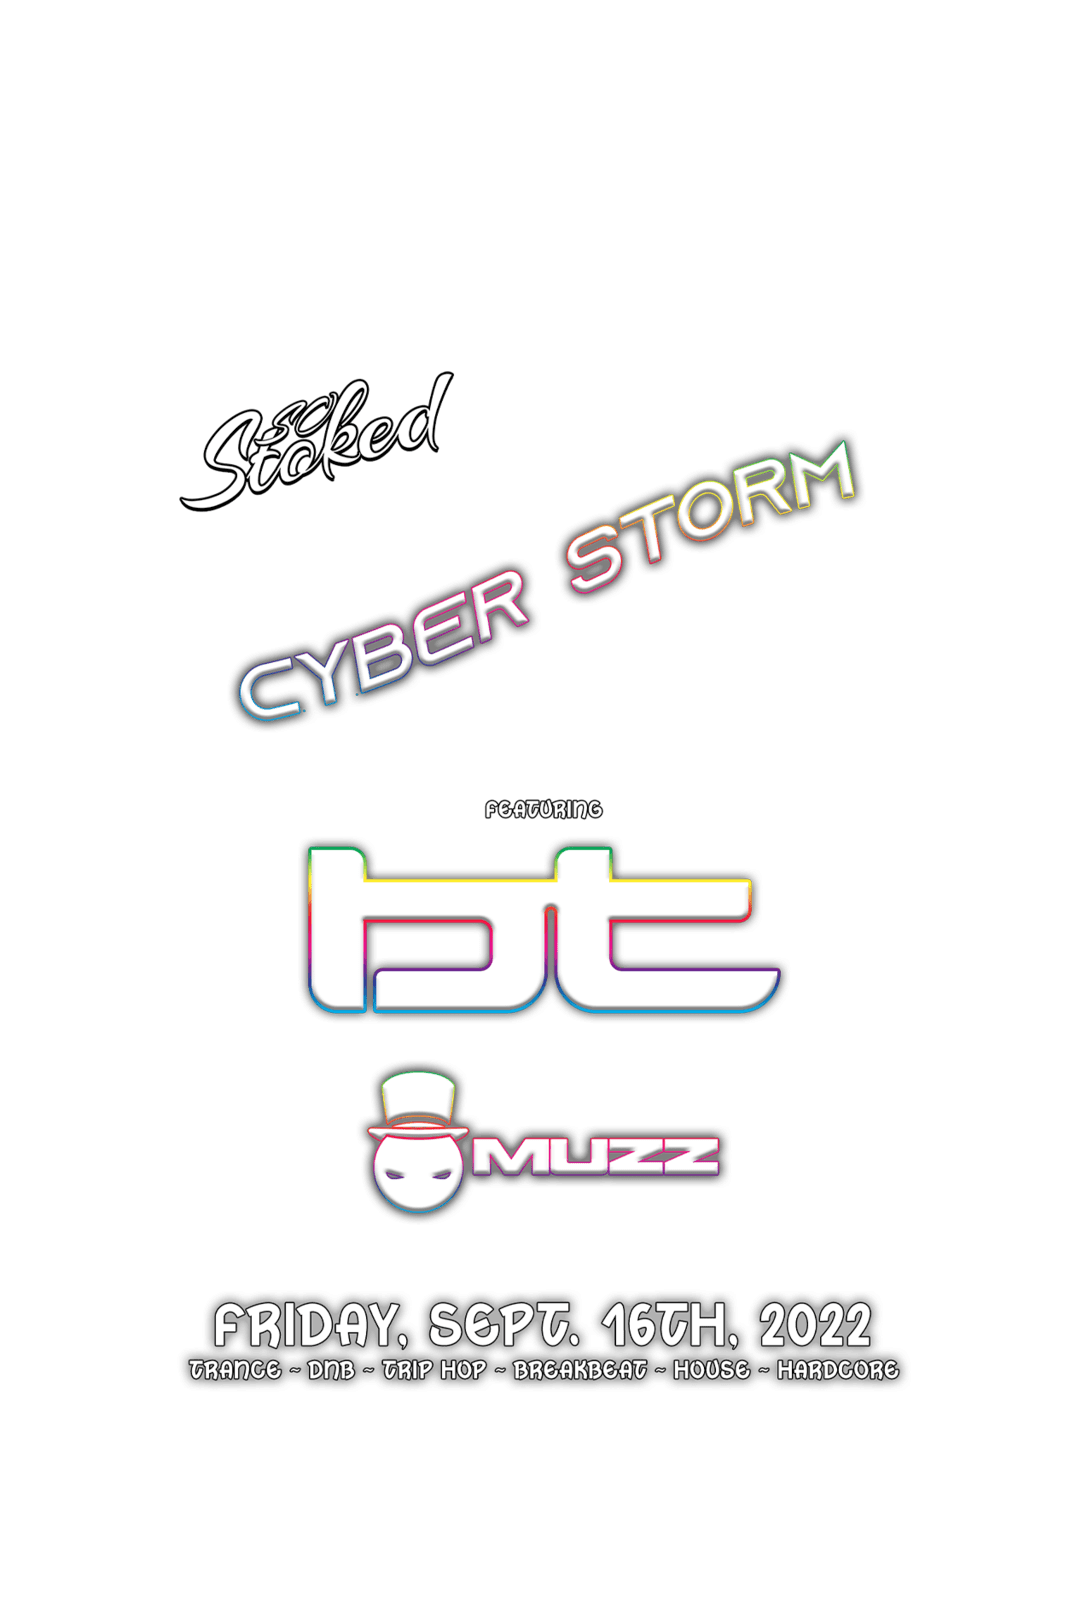 So Stoked Cyber Storm flyer